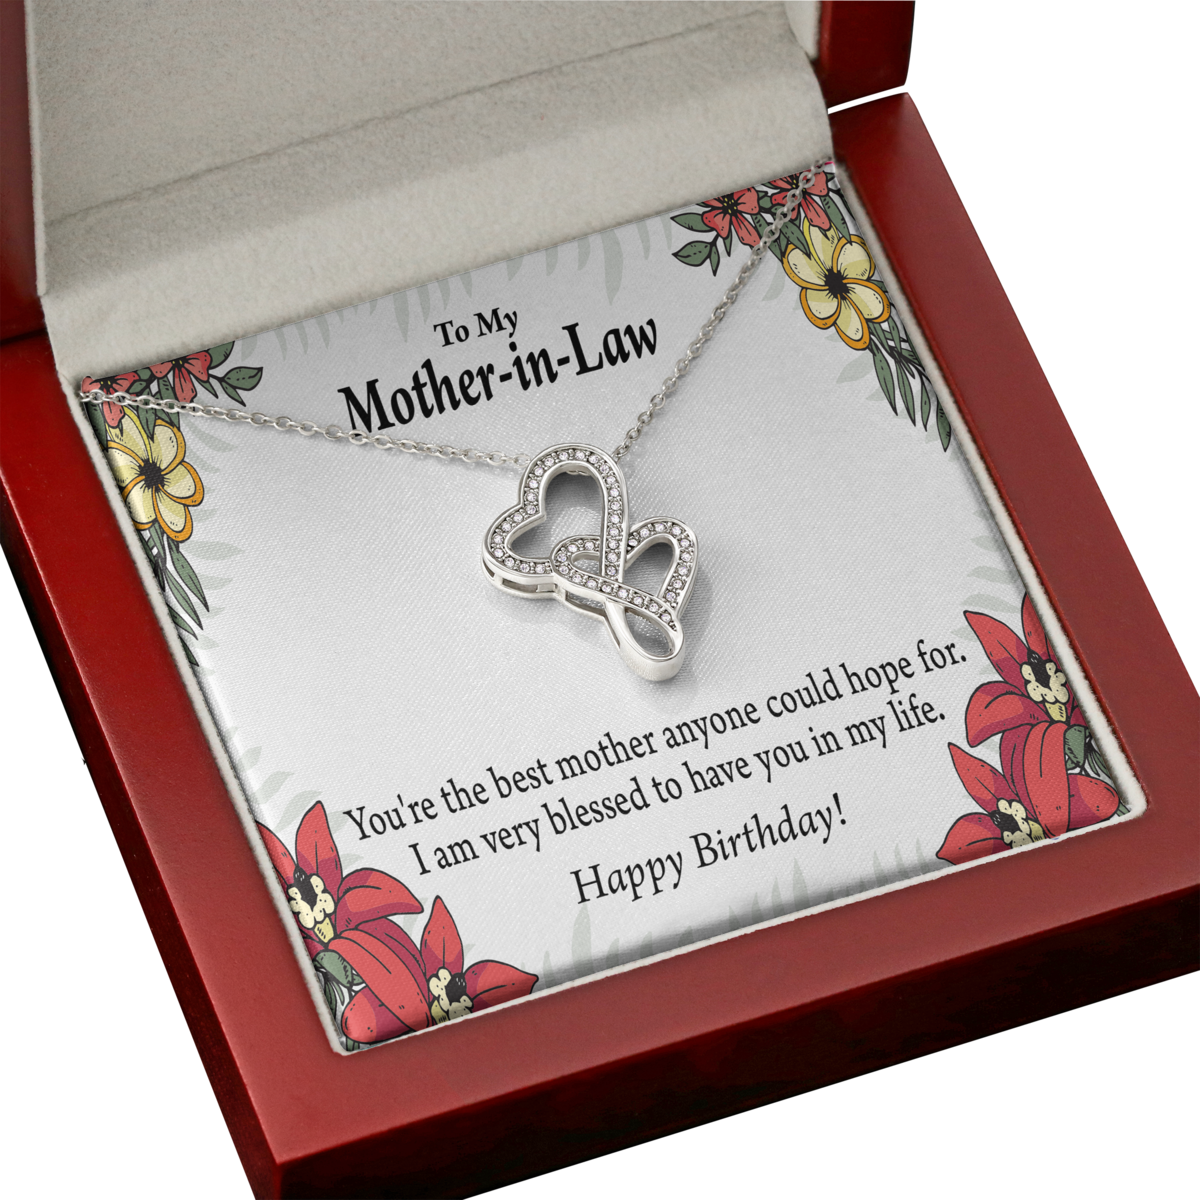 Mother-in-law Necklace Happy Birthday Mother - in law DOUBLE HEART TEXT CARD F